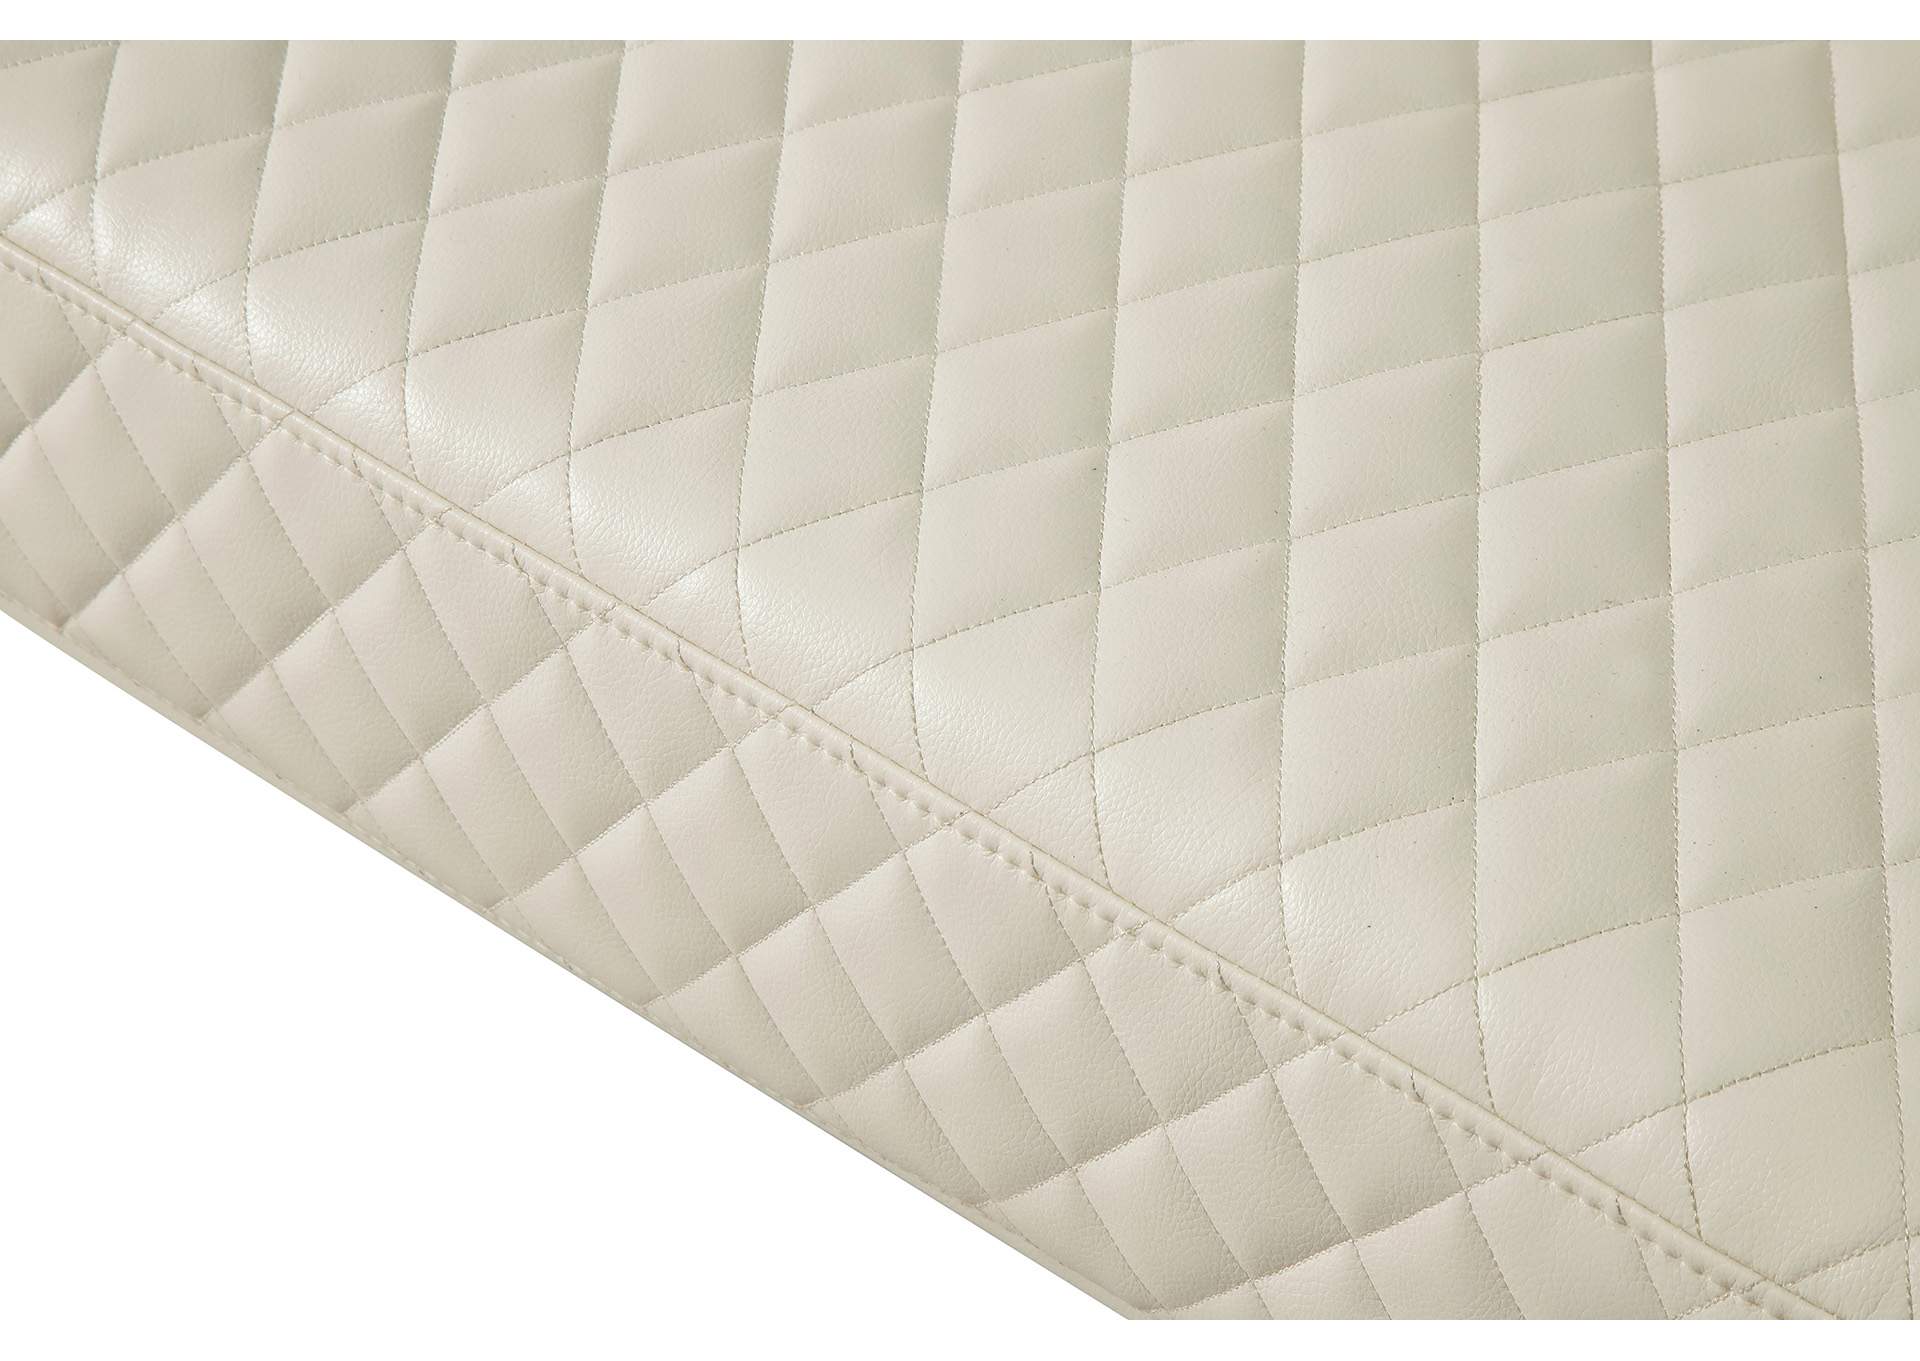 Quilted White Chair,Global Furniture USA